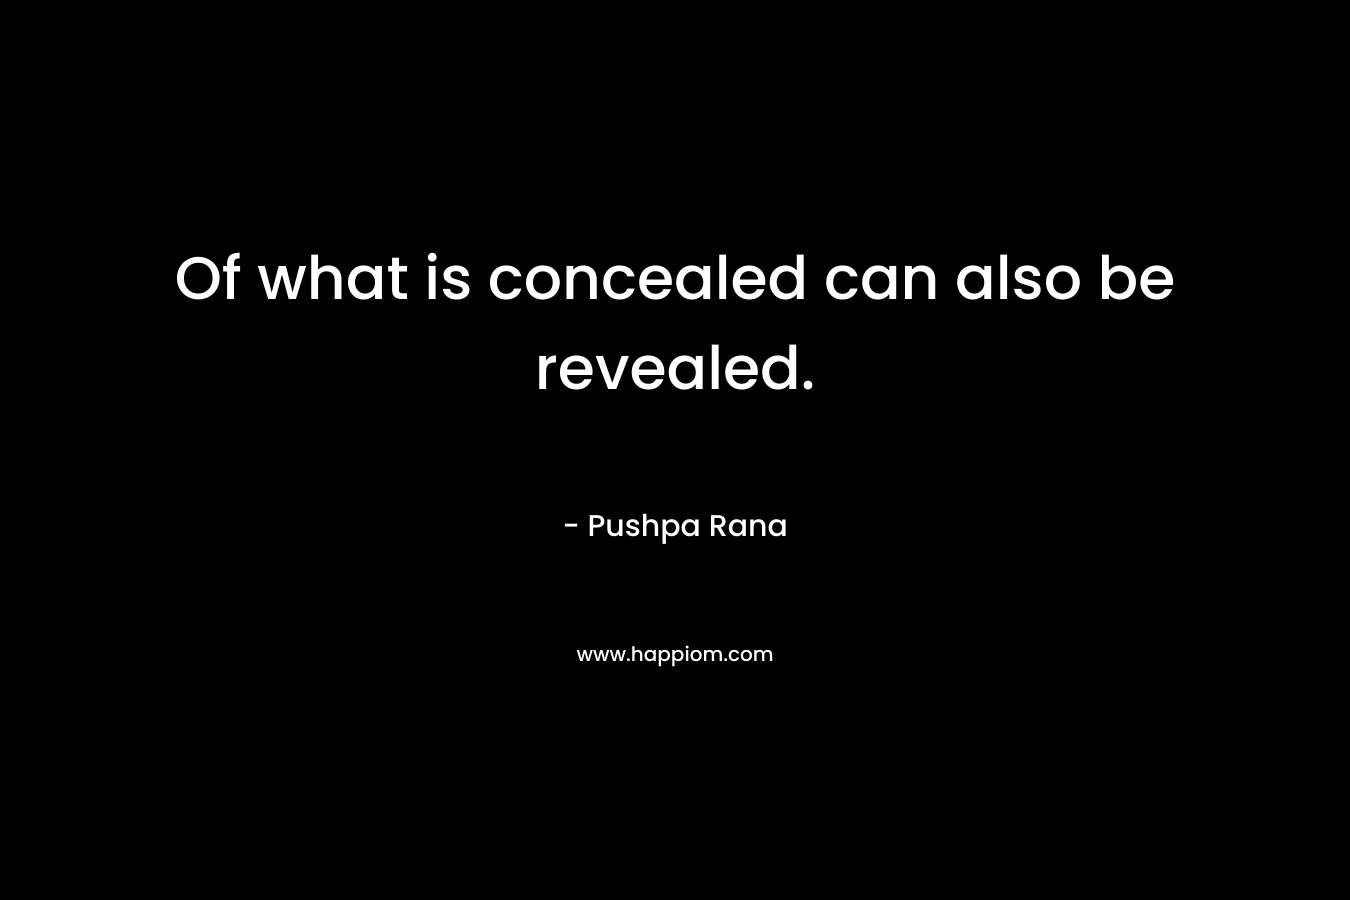 Of what is concealed can also be revealed. – Pushpa Rana